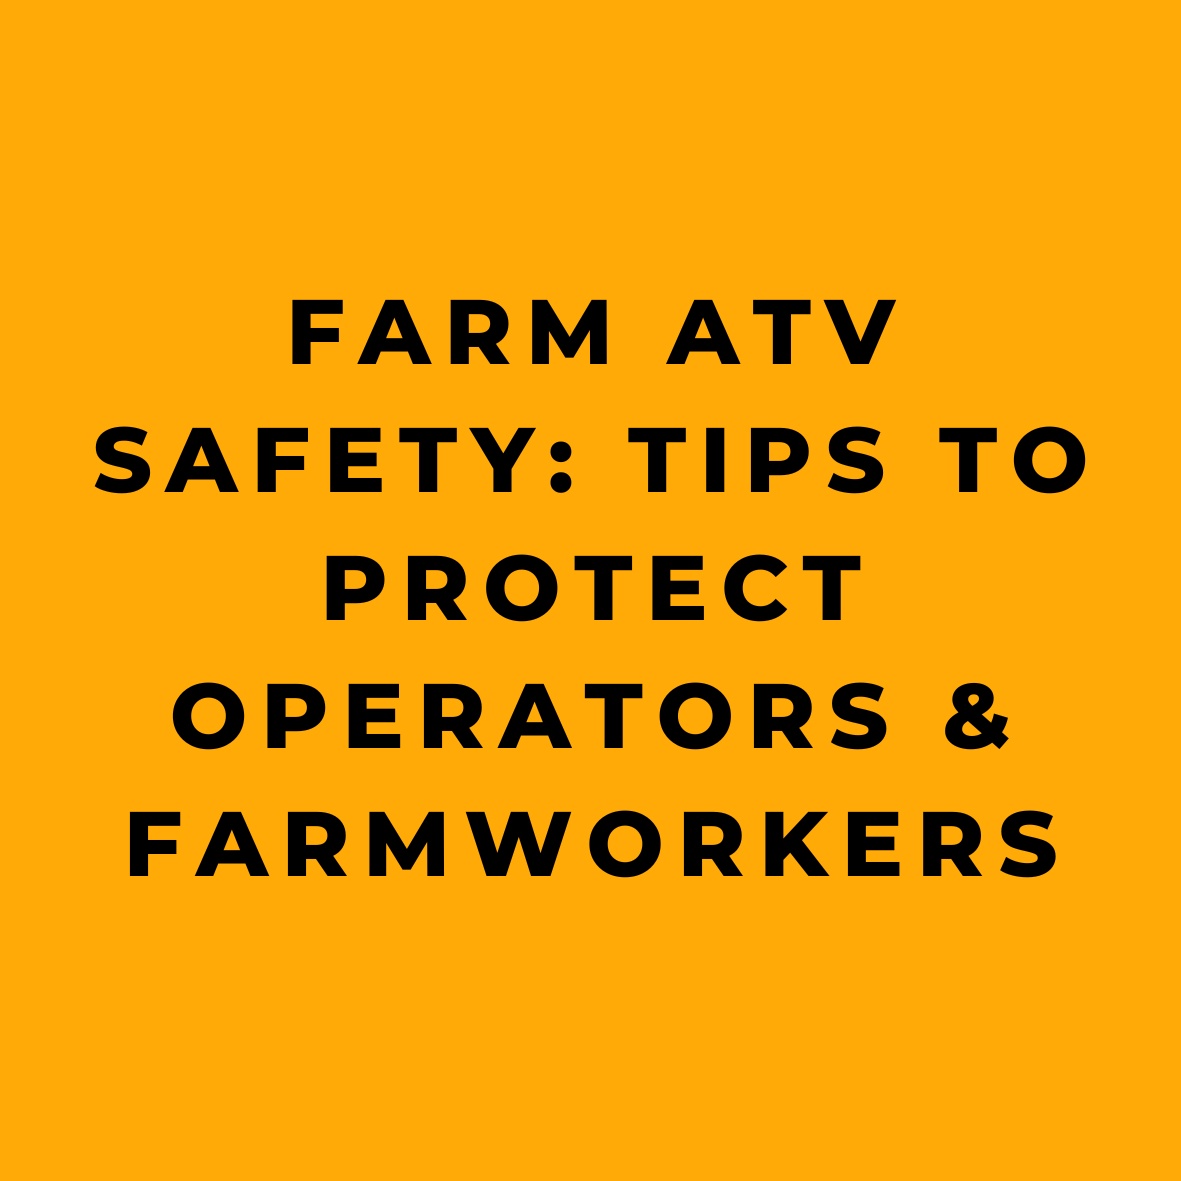 Farm ATV Safety Tips to Protect Operators & Farmworkers